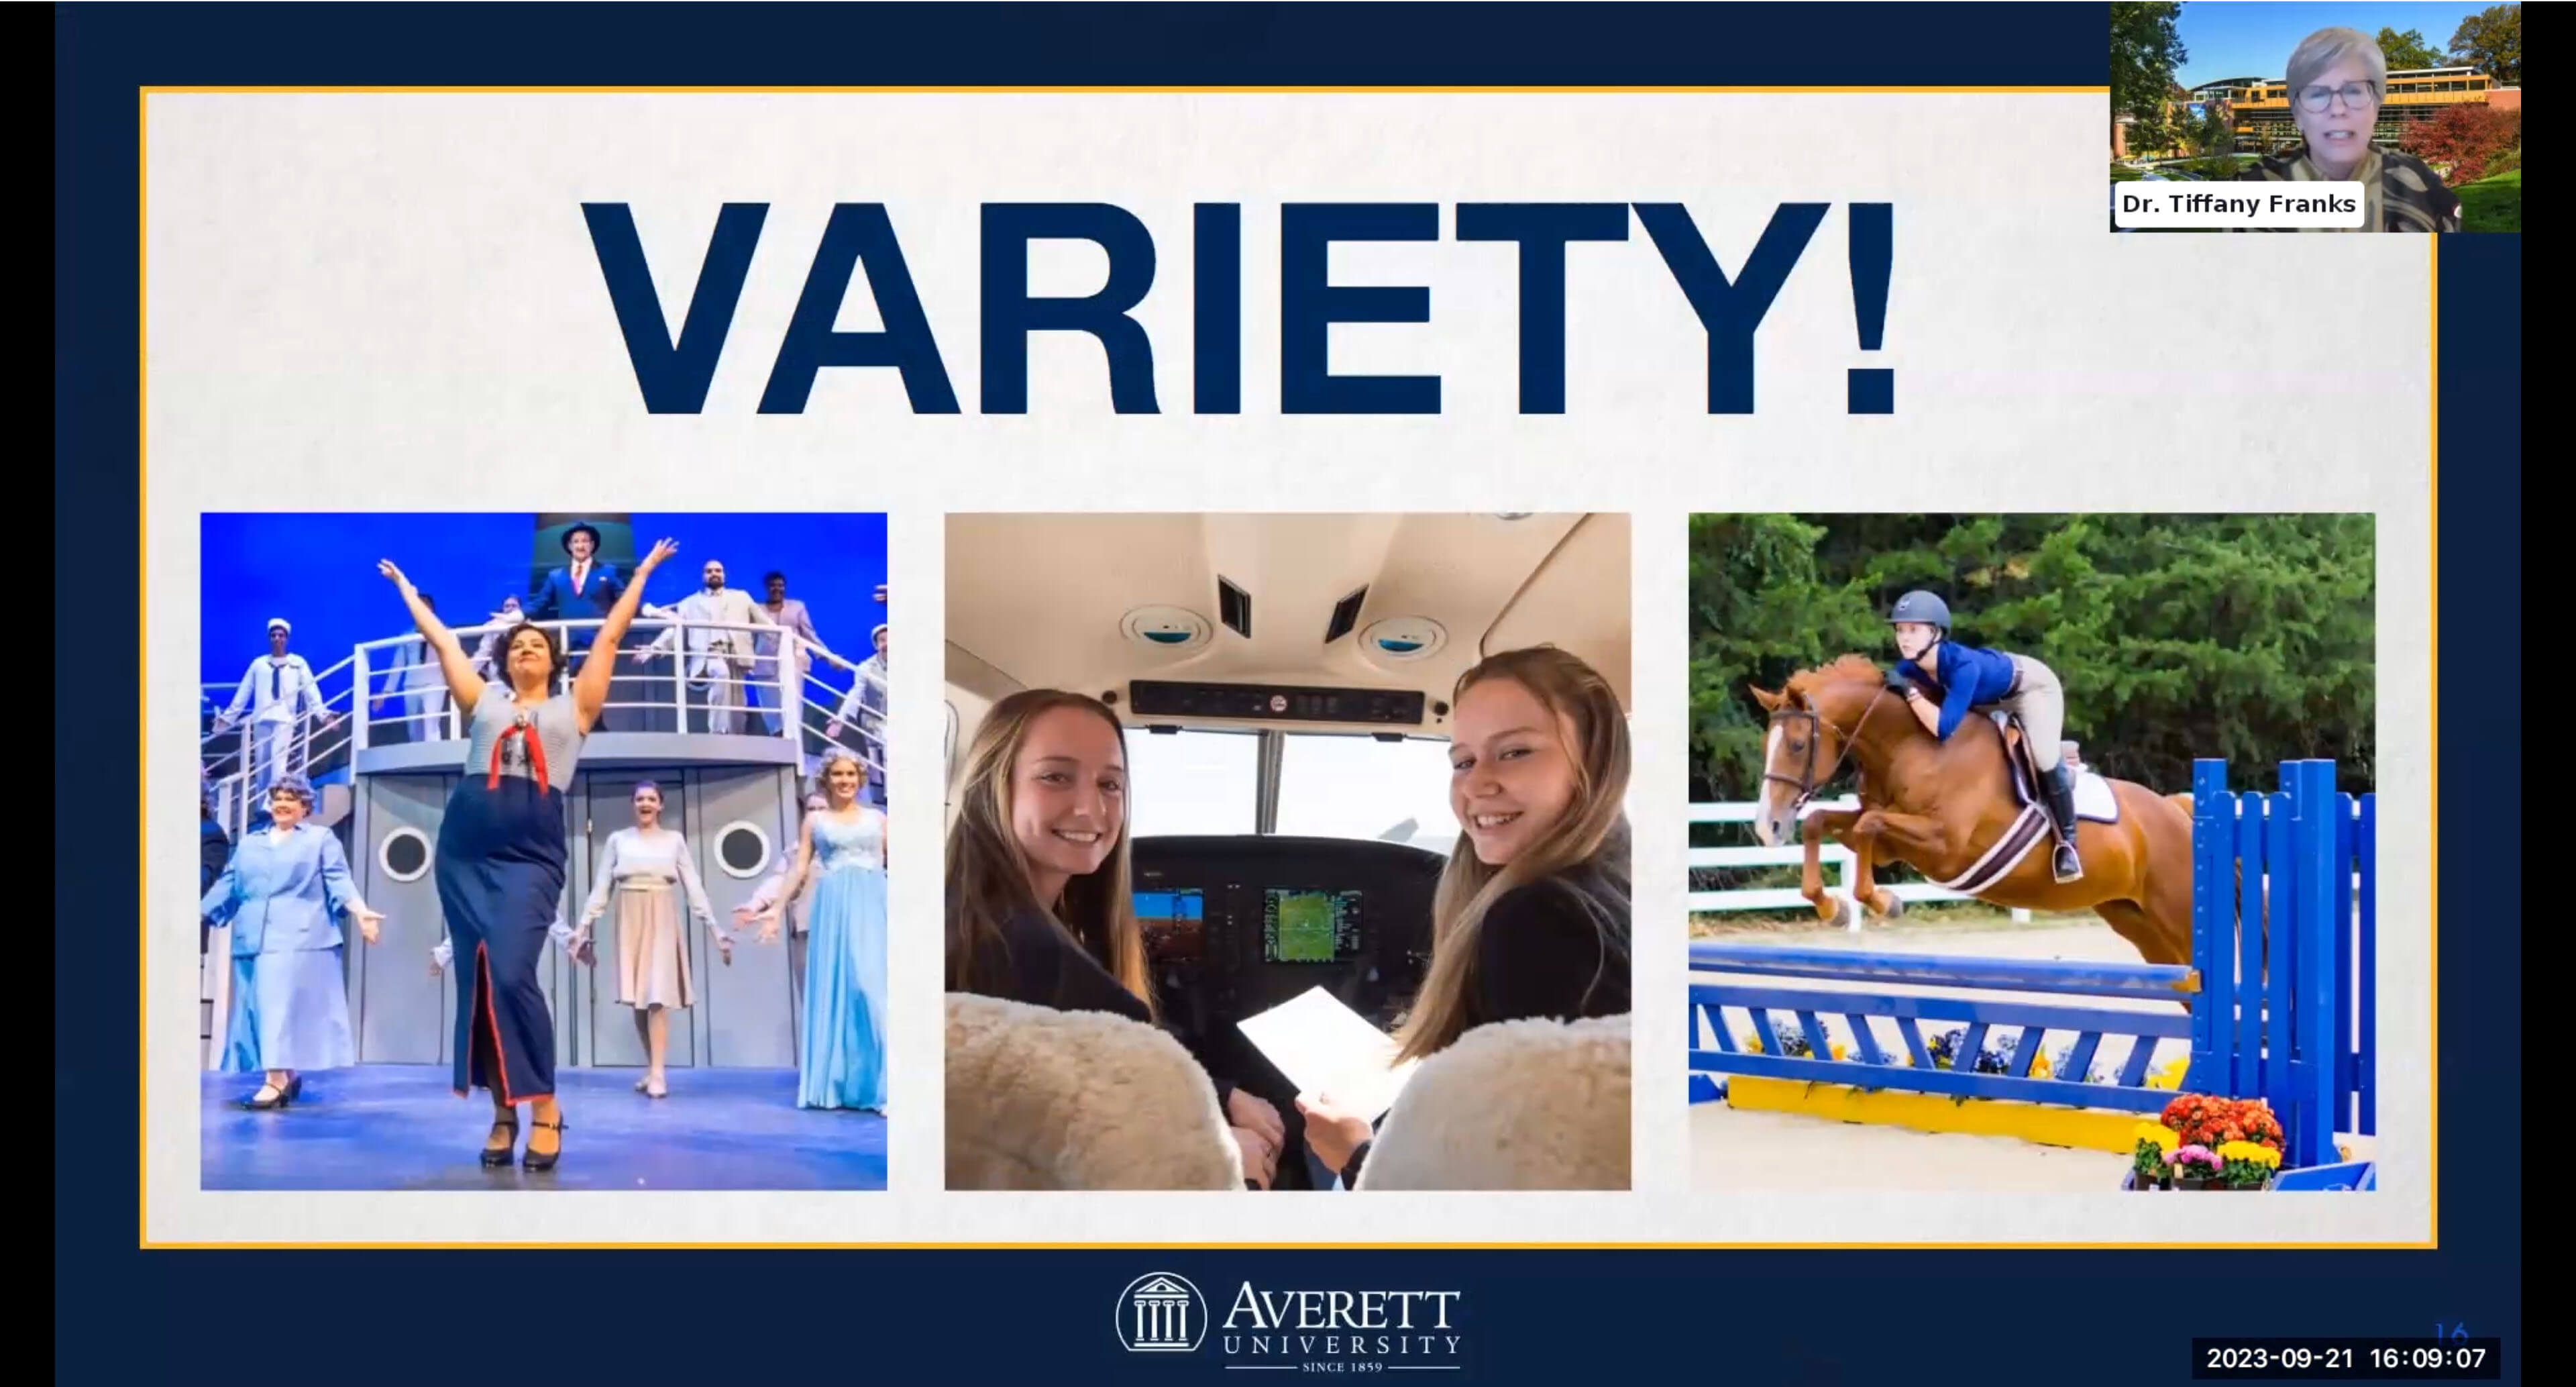 Variety adds interest to life and college.